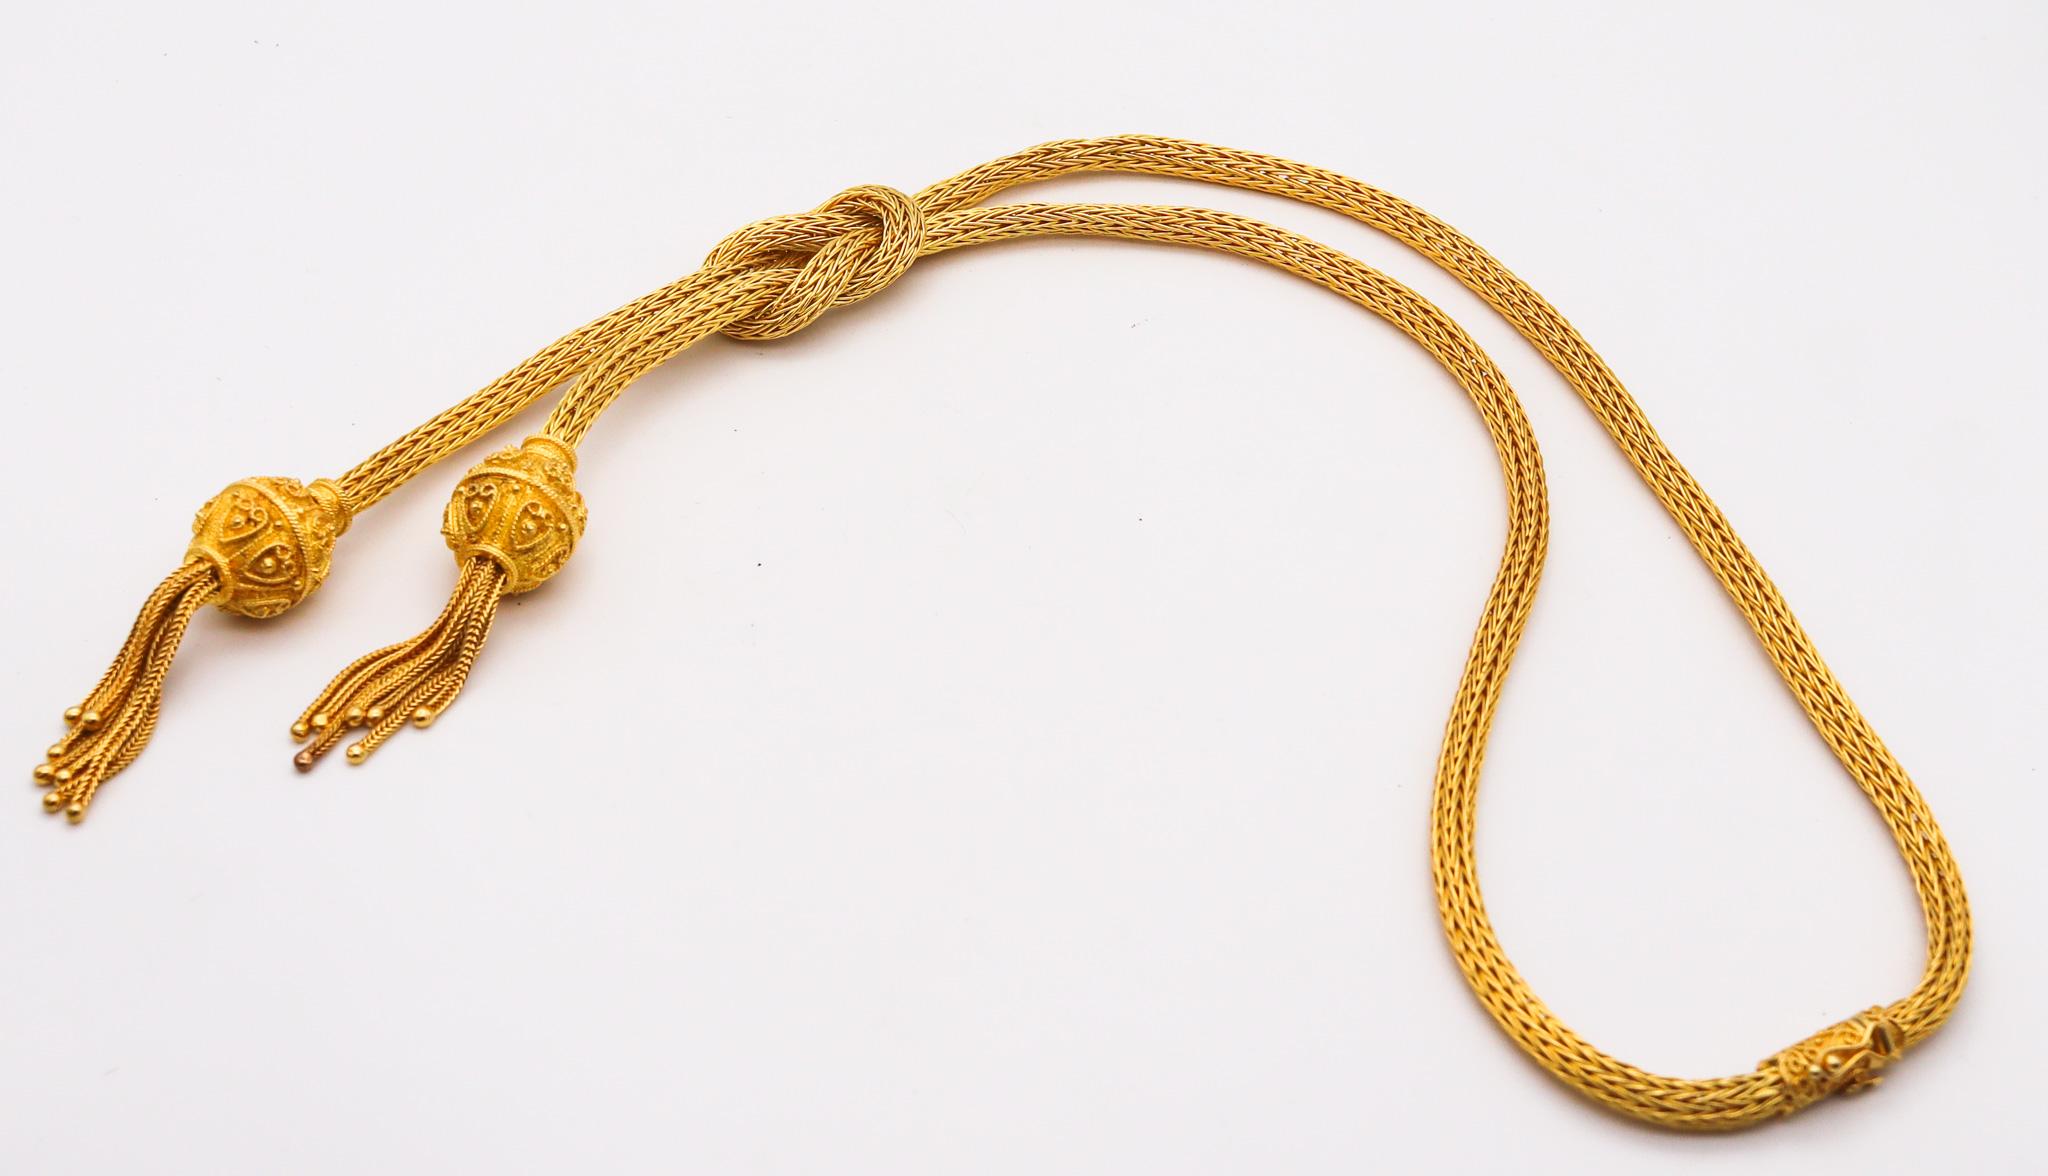 Zolotas Greek Revival Hercules Sautoir Mesh Necklace In solid 18Kt Yellow Gold In Excellent Condition For Sale In Miami, FL